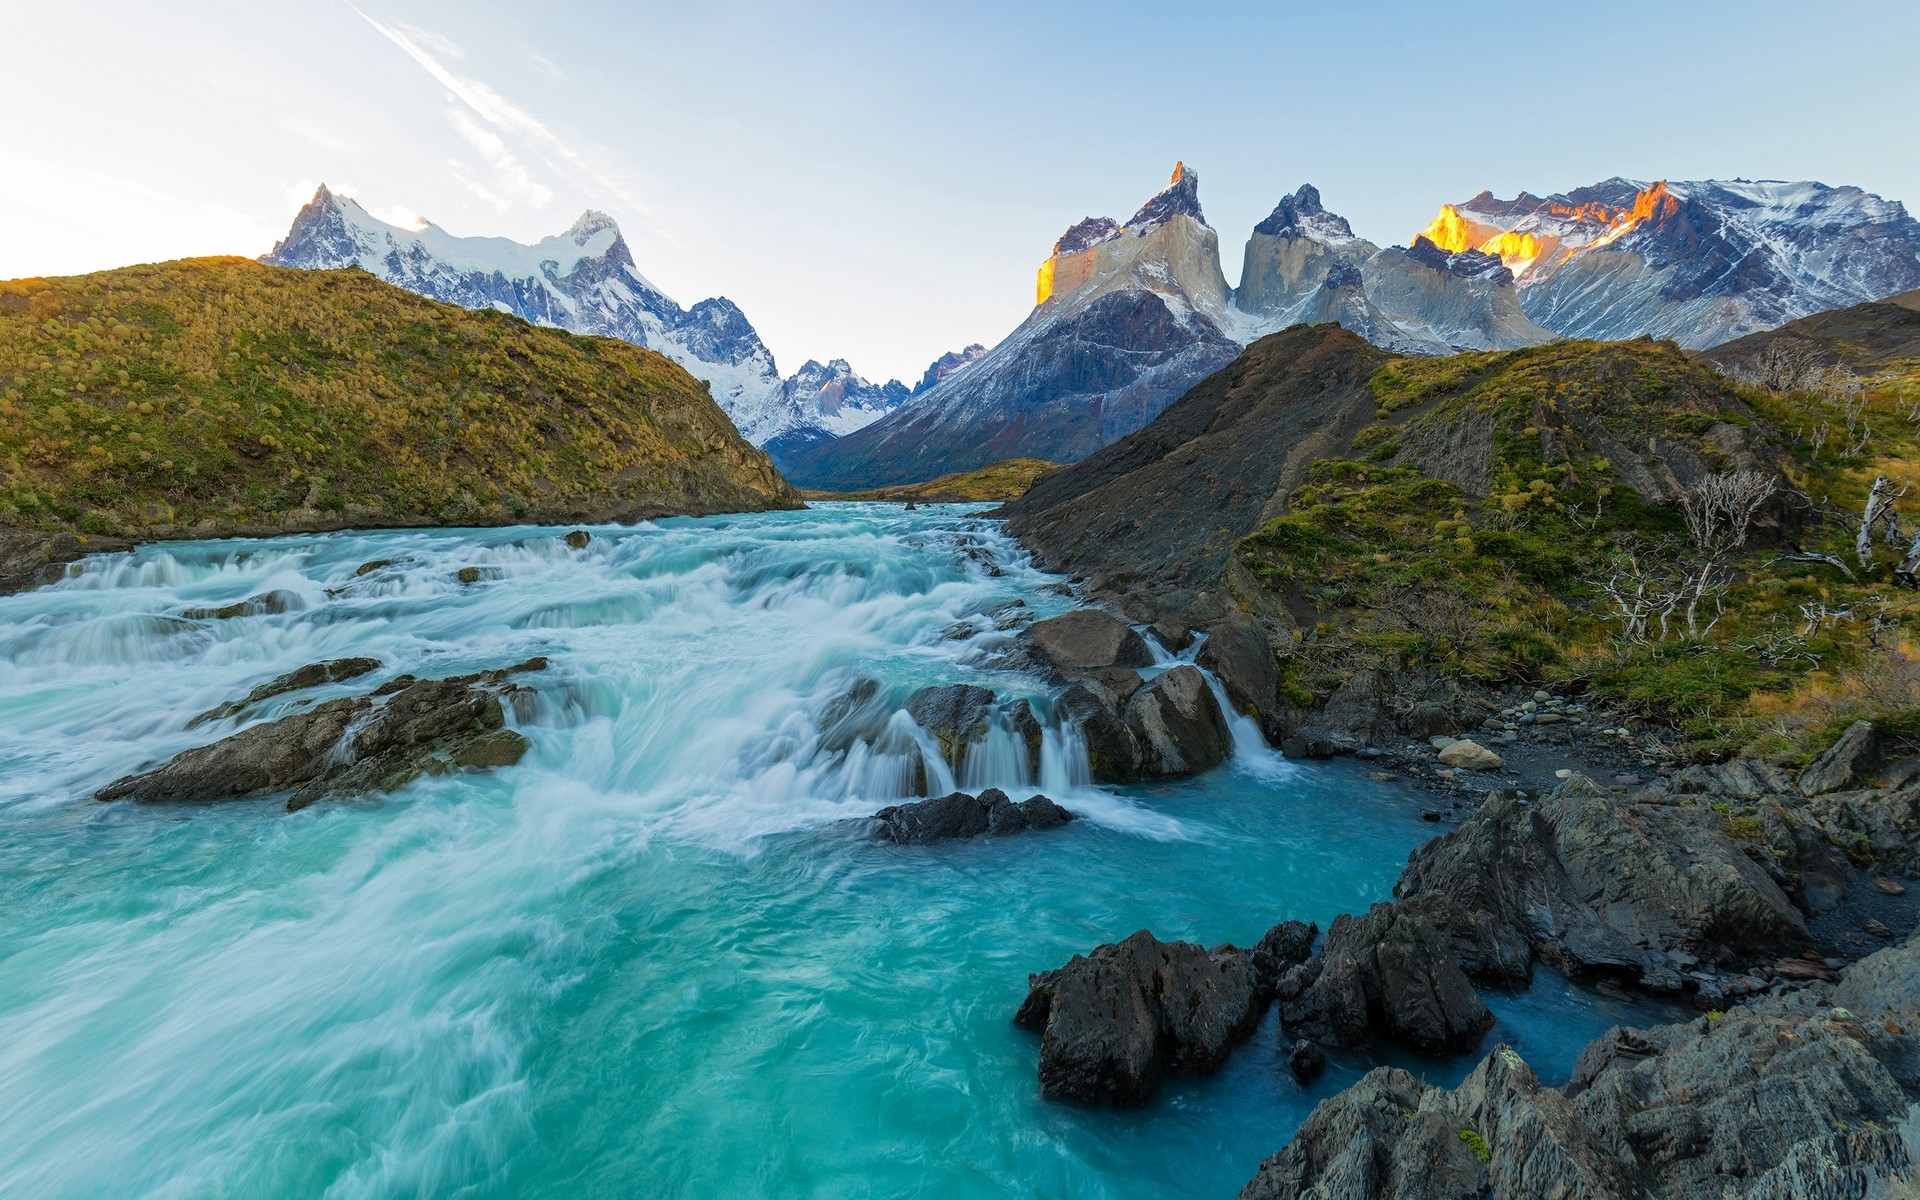 General 1920x1200 nature landscape Chile mountains sunset river rapids snowy peak Torres del Paine turquoise water South America